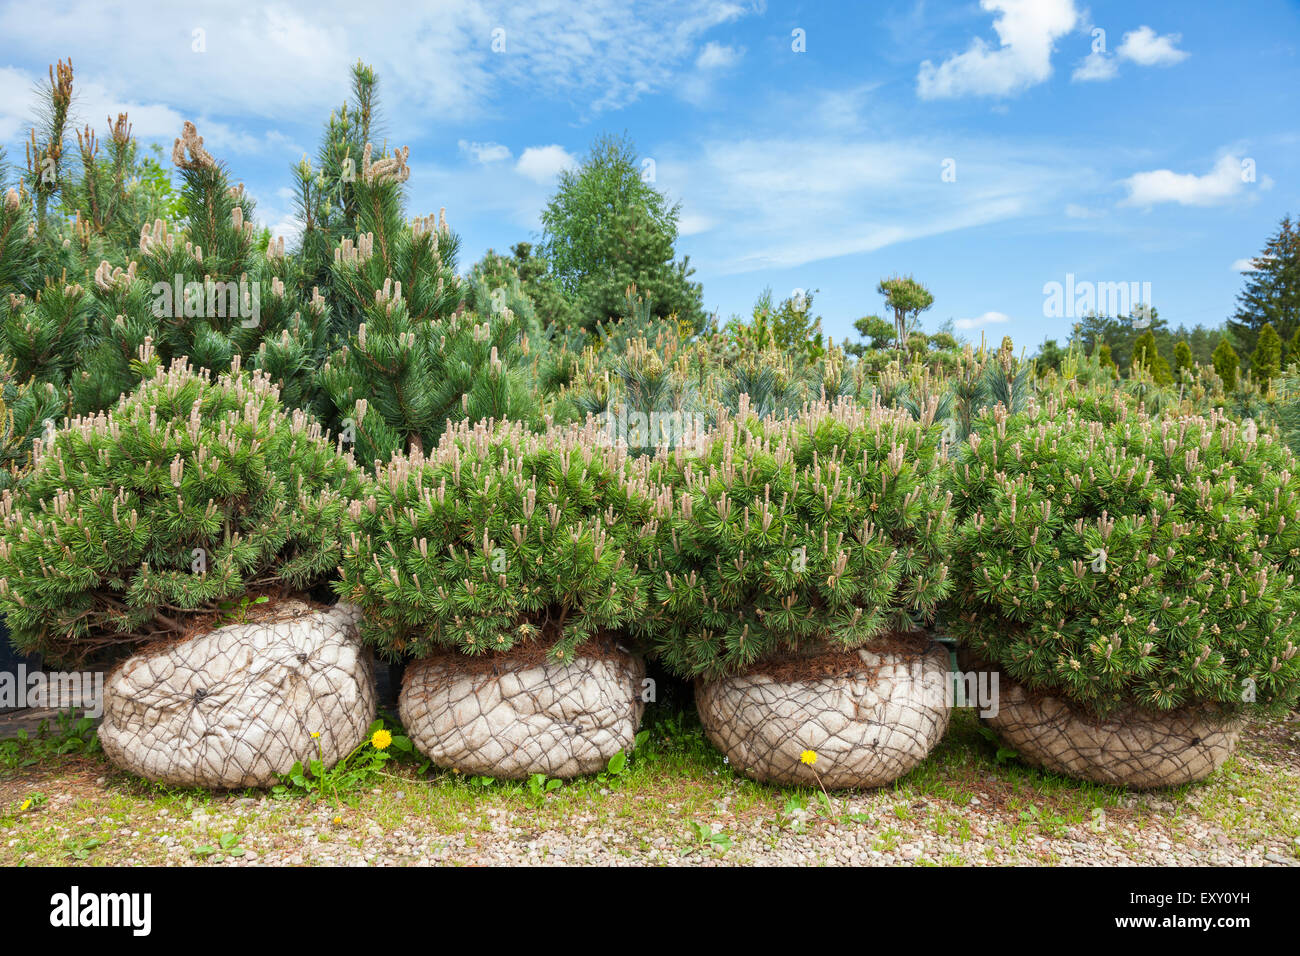 Pine with wrapped roots on tree nursery farm Stock Photo